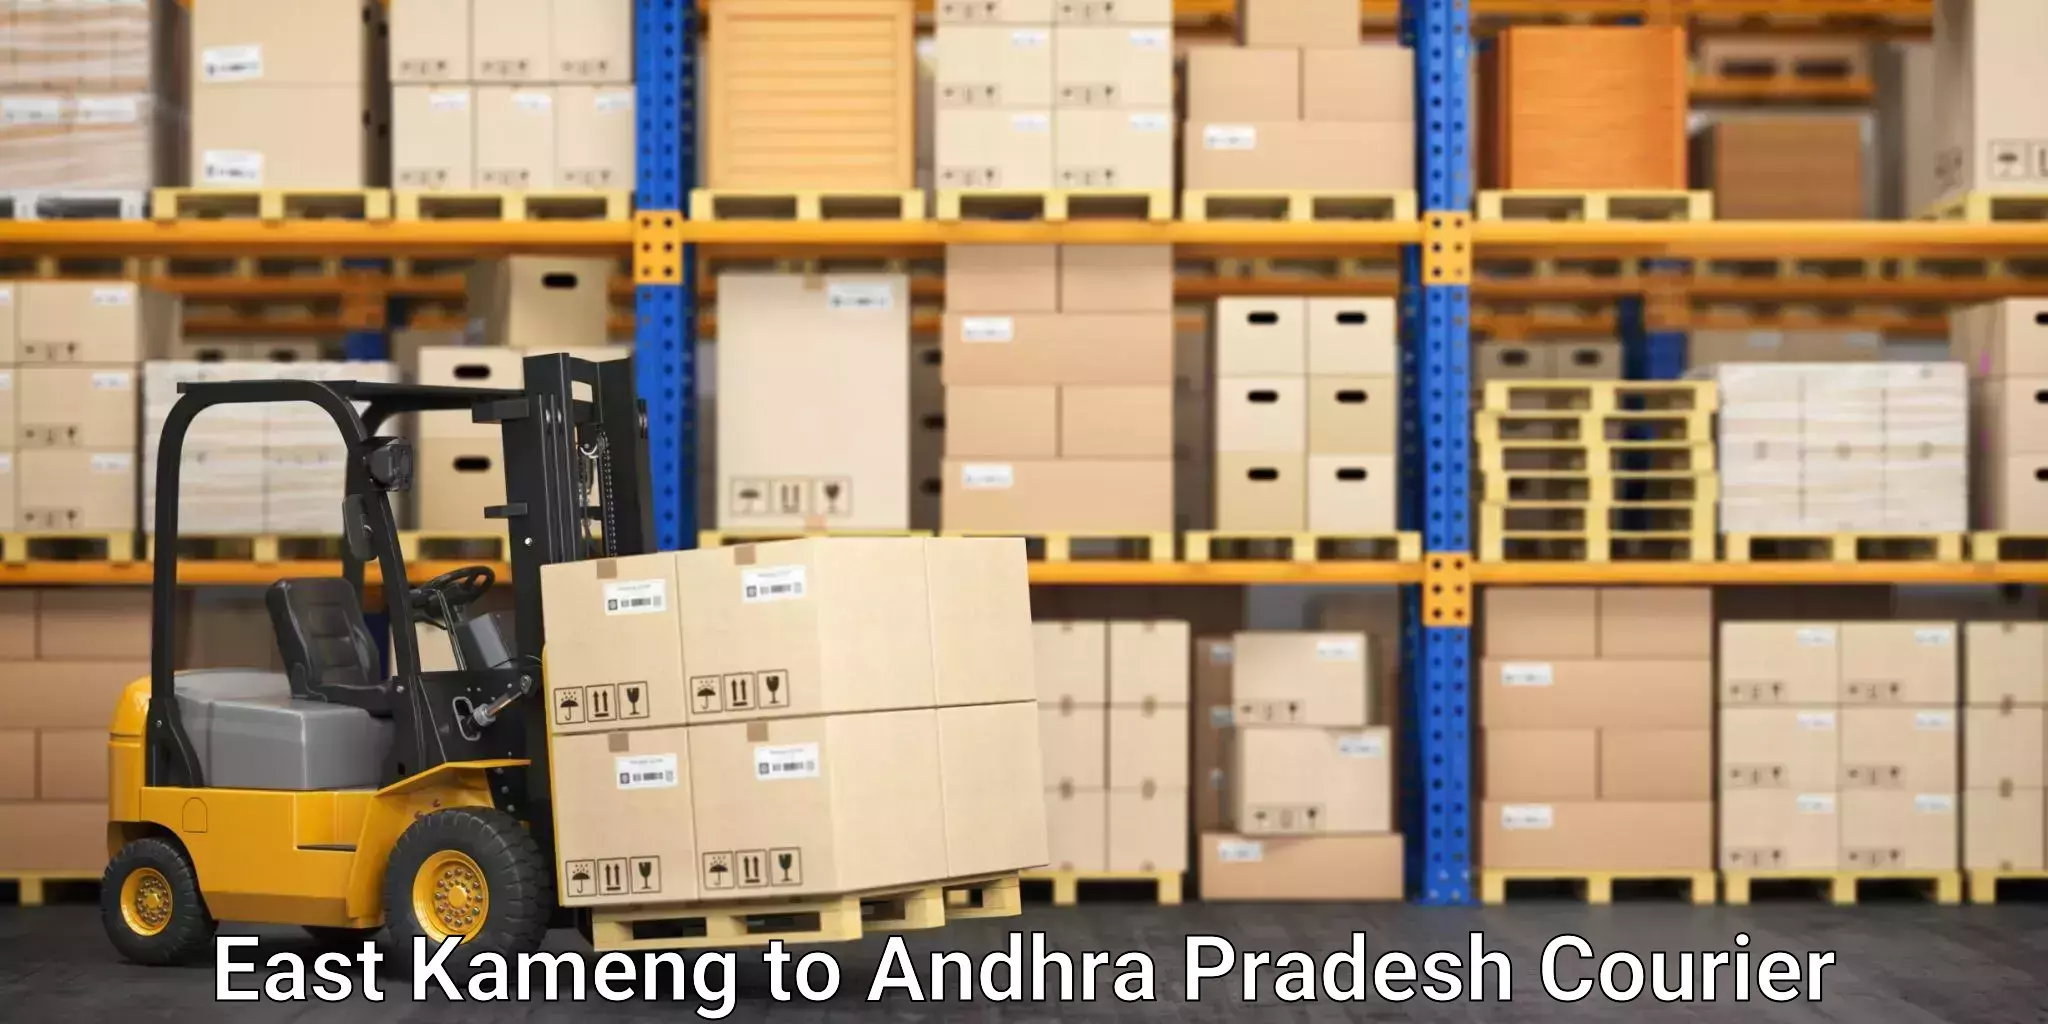 On-demand courier East Kameng to Andhra Pradesh